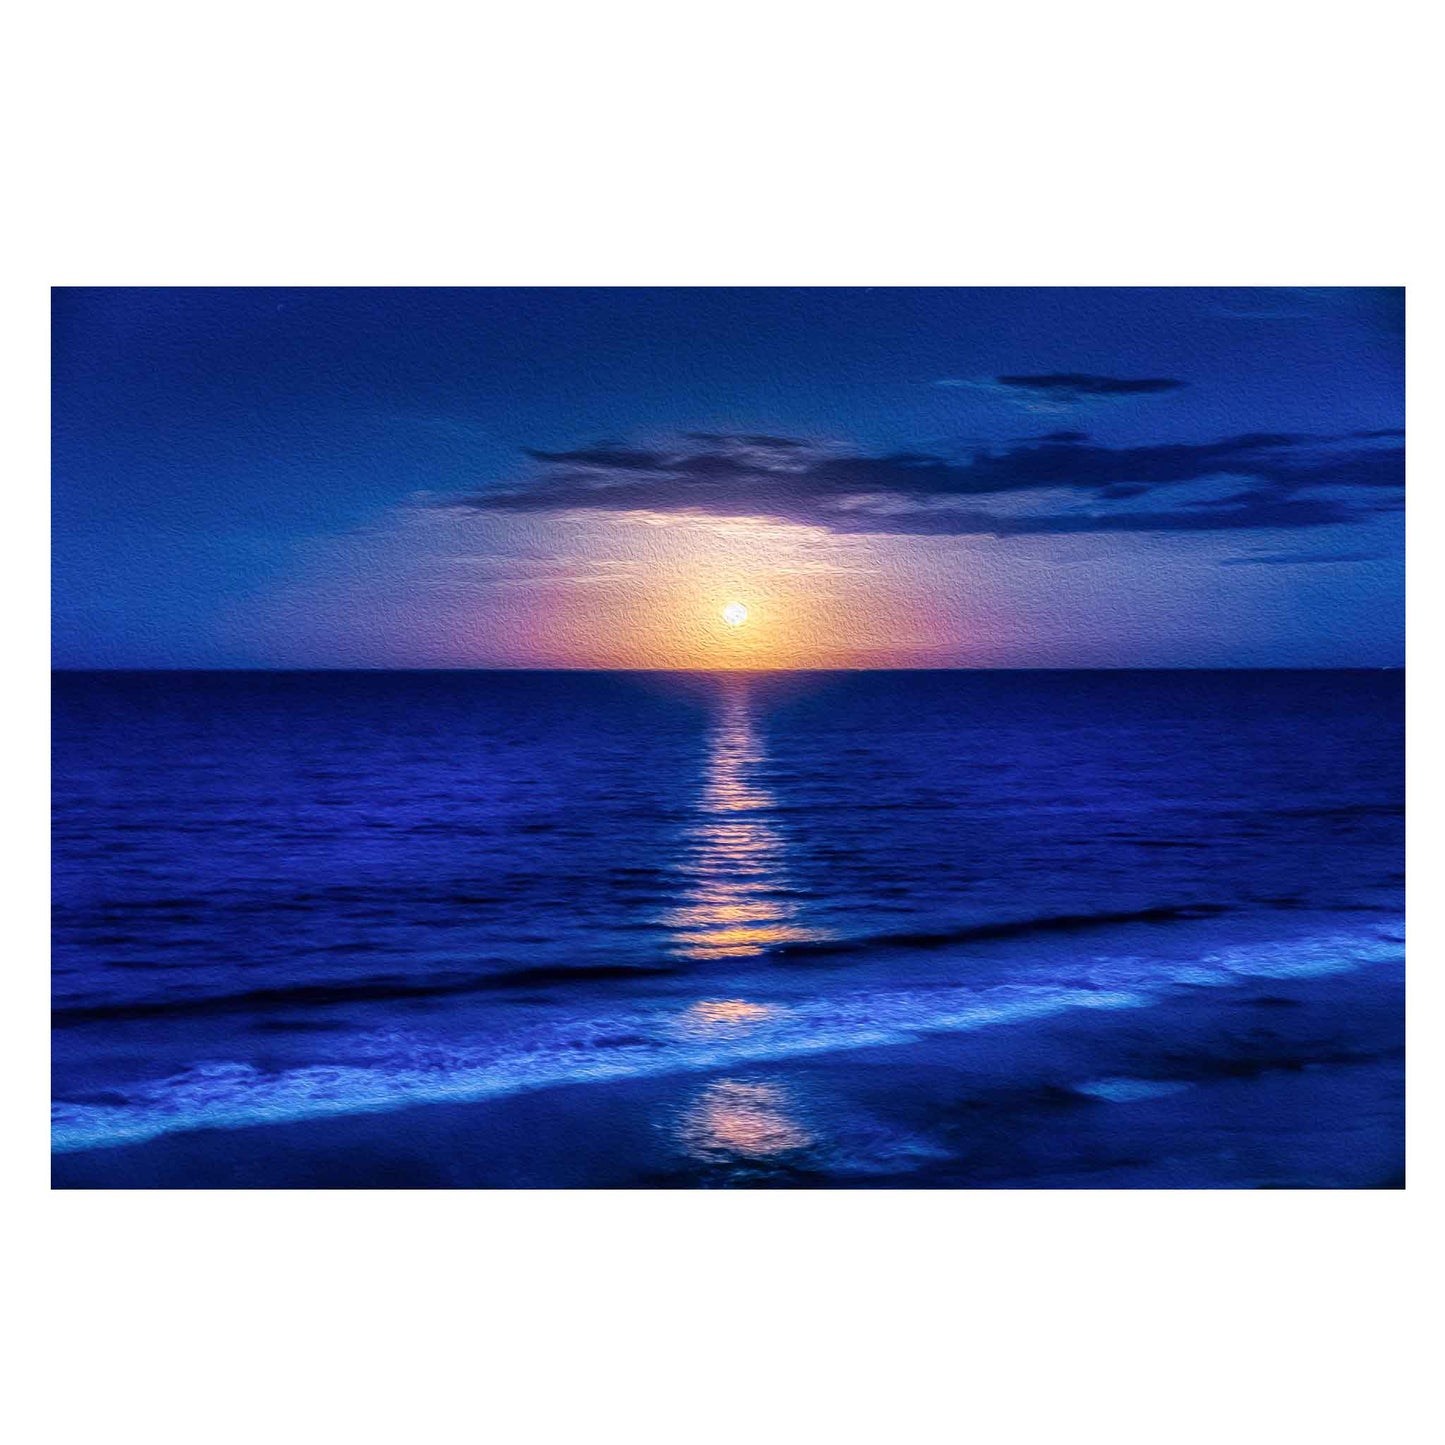 ECC "Blue Moon" Canvas Print - 8x10 inches, Original photograph by Photographer Claire Closson, Blues and violet with the orange glow of the moon rise. Canvas print is ready to hang.